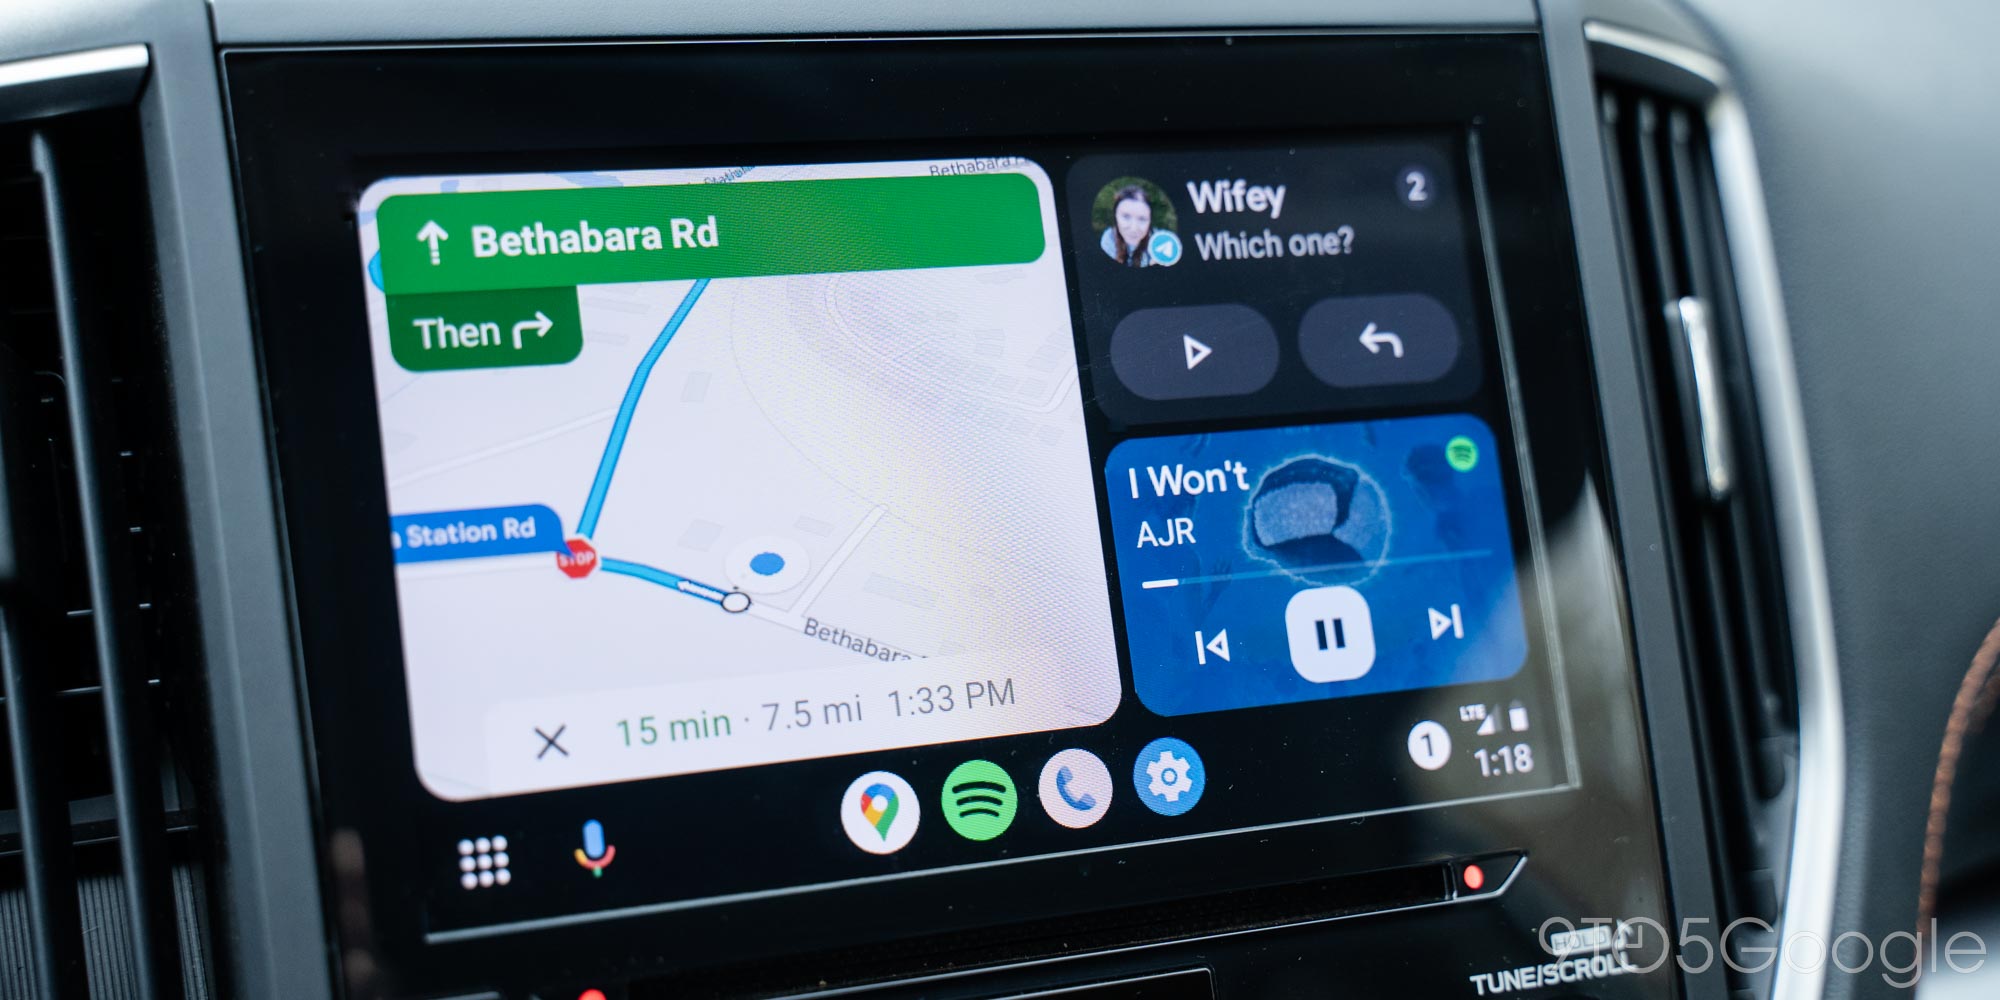 Android Auto is getting updated looks, and you should be excited - CNET